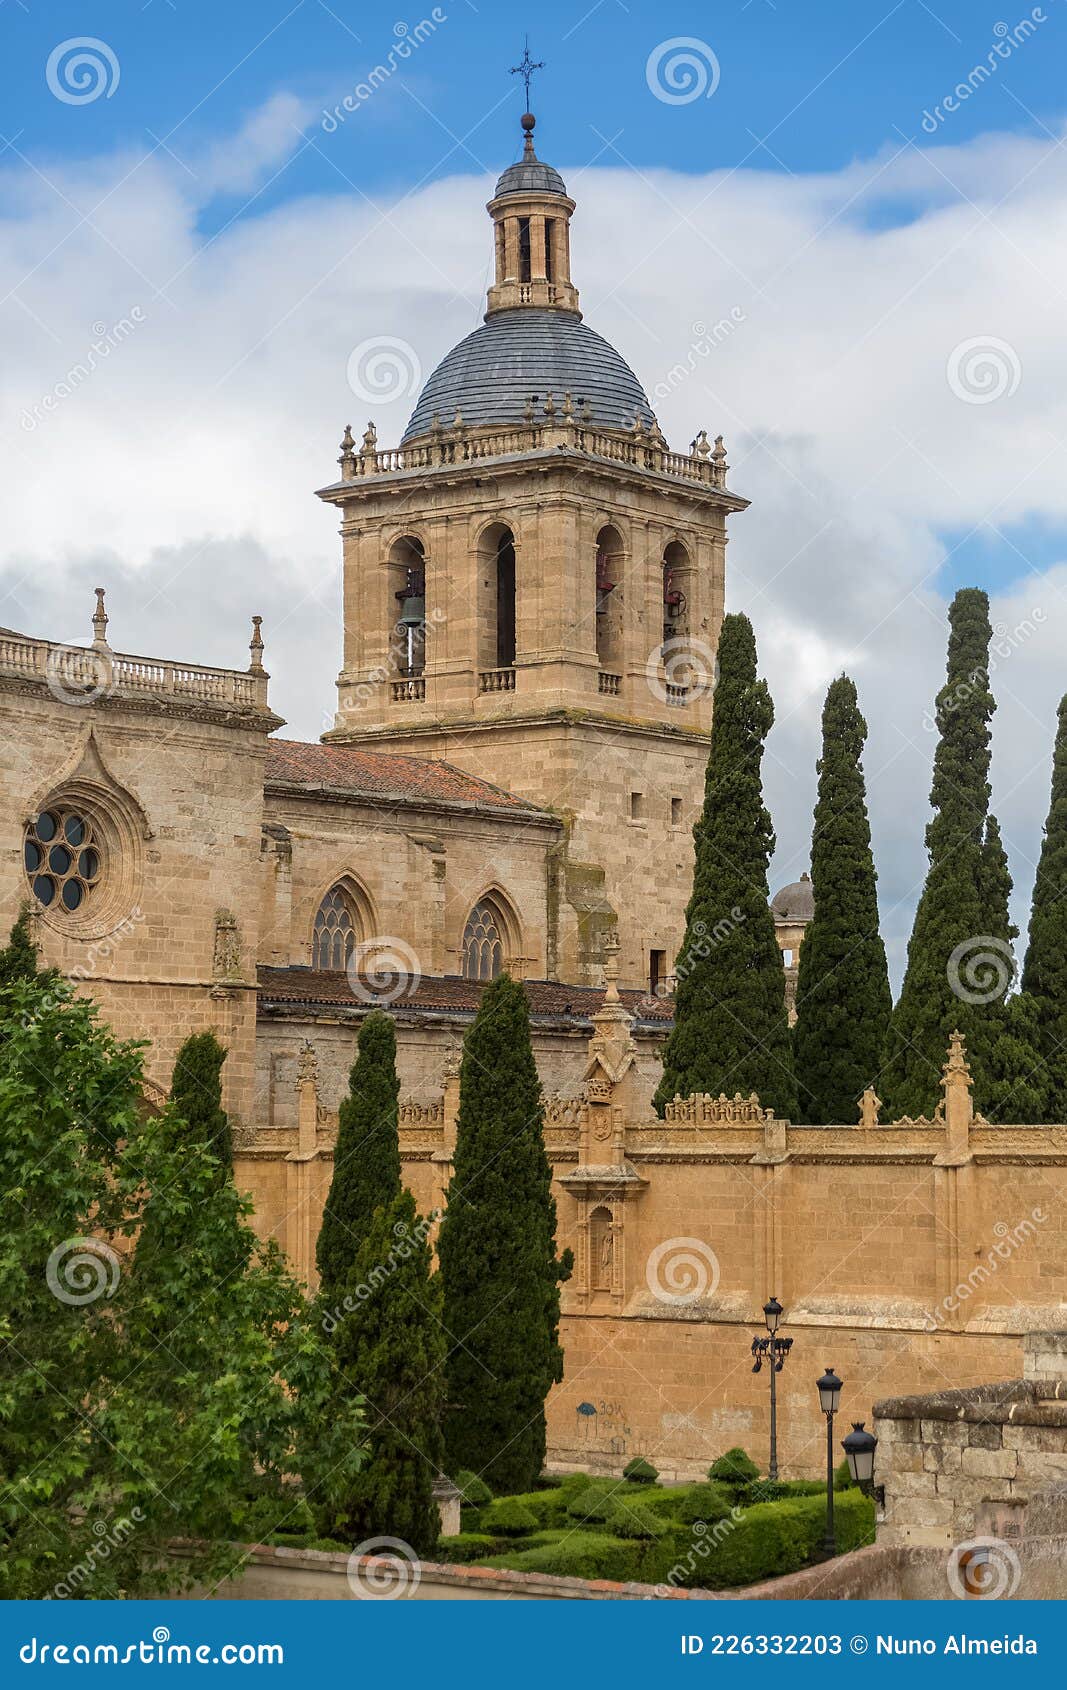 lateral view at the iconic spanish romanesque architecture building at the cuidad rodrigo cathedral, towers and domes